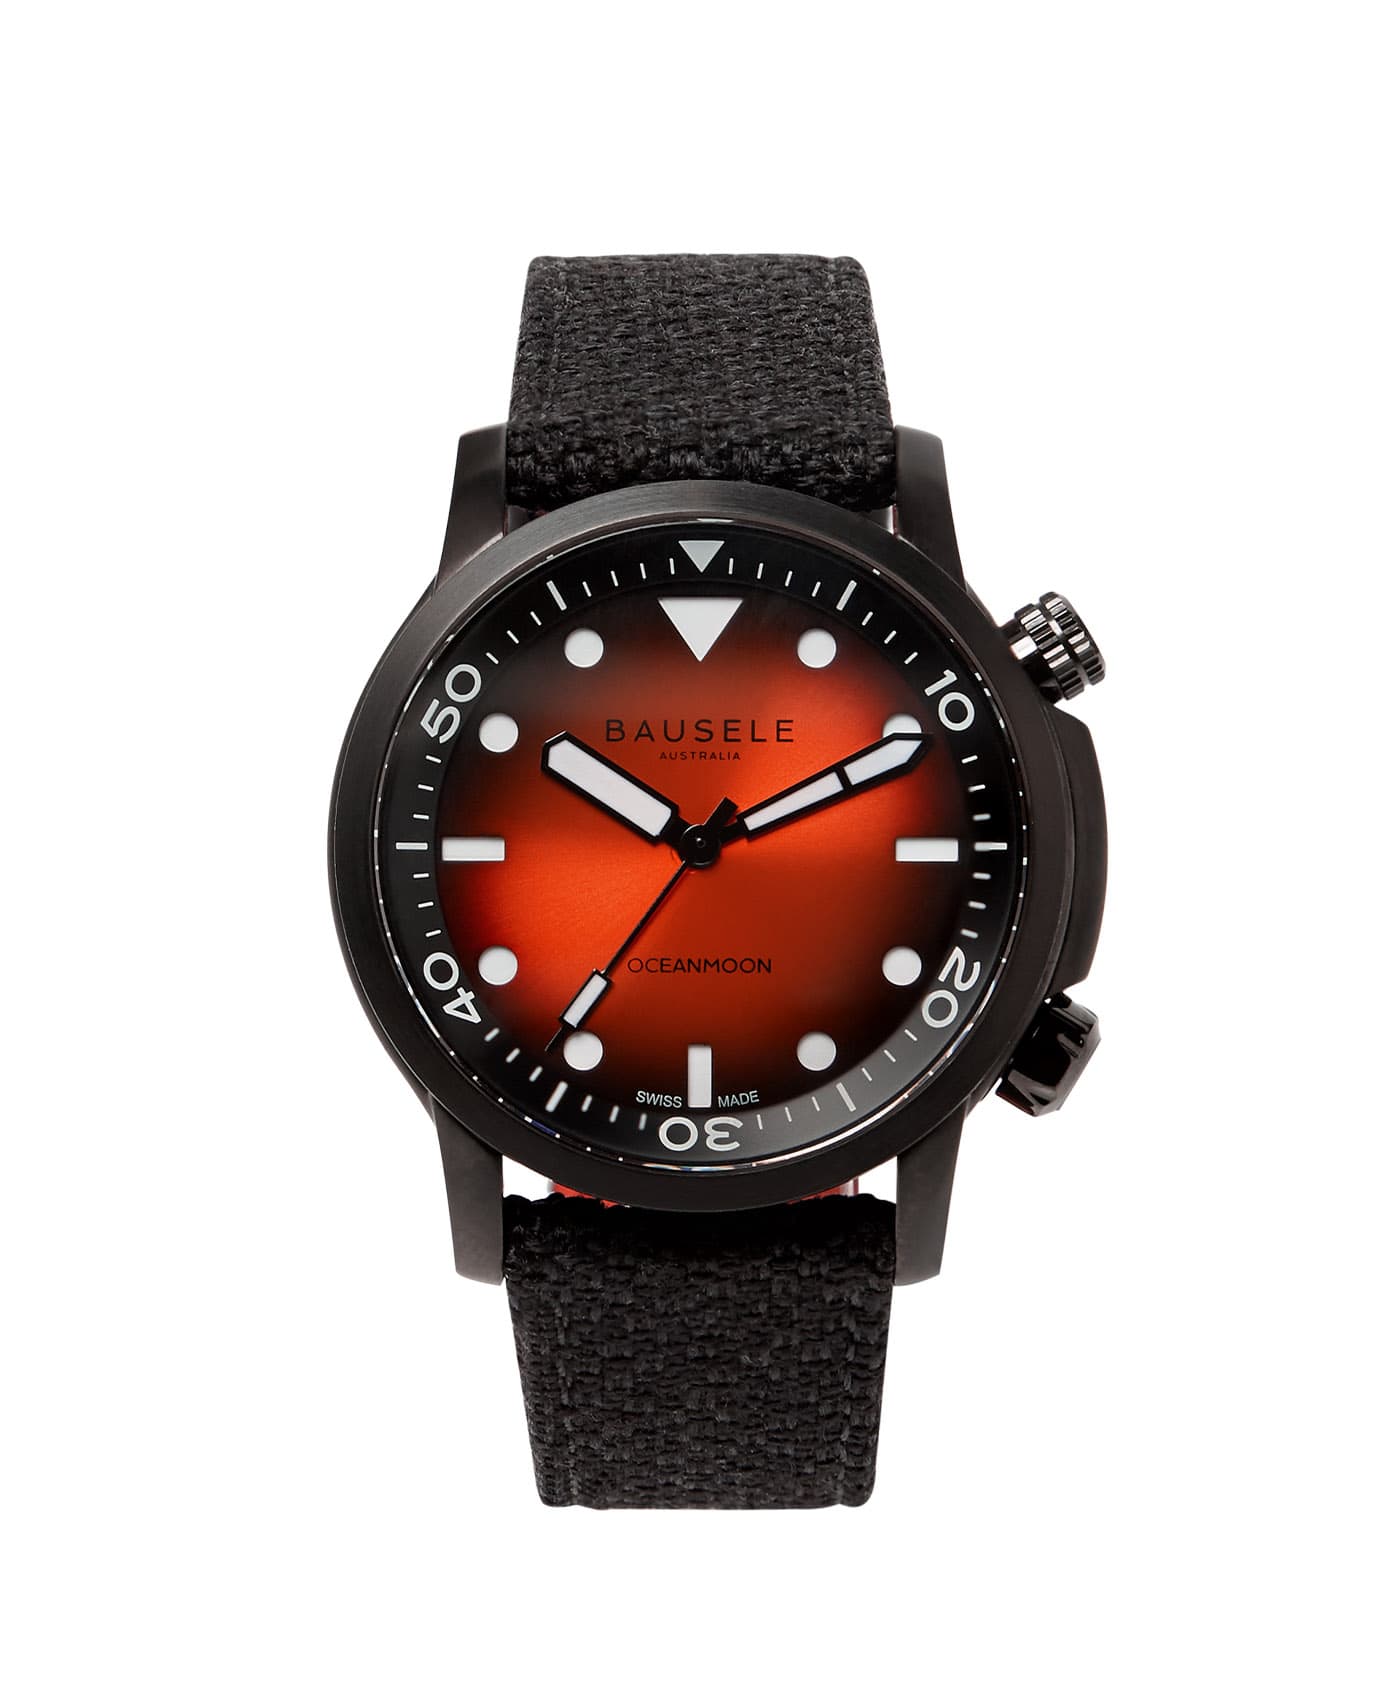 BASELE WATCHES_ Oceanmoon IV - Watchfest Pax 2020 Limited Edition - front